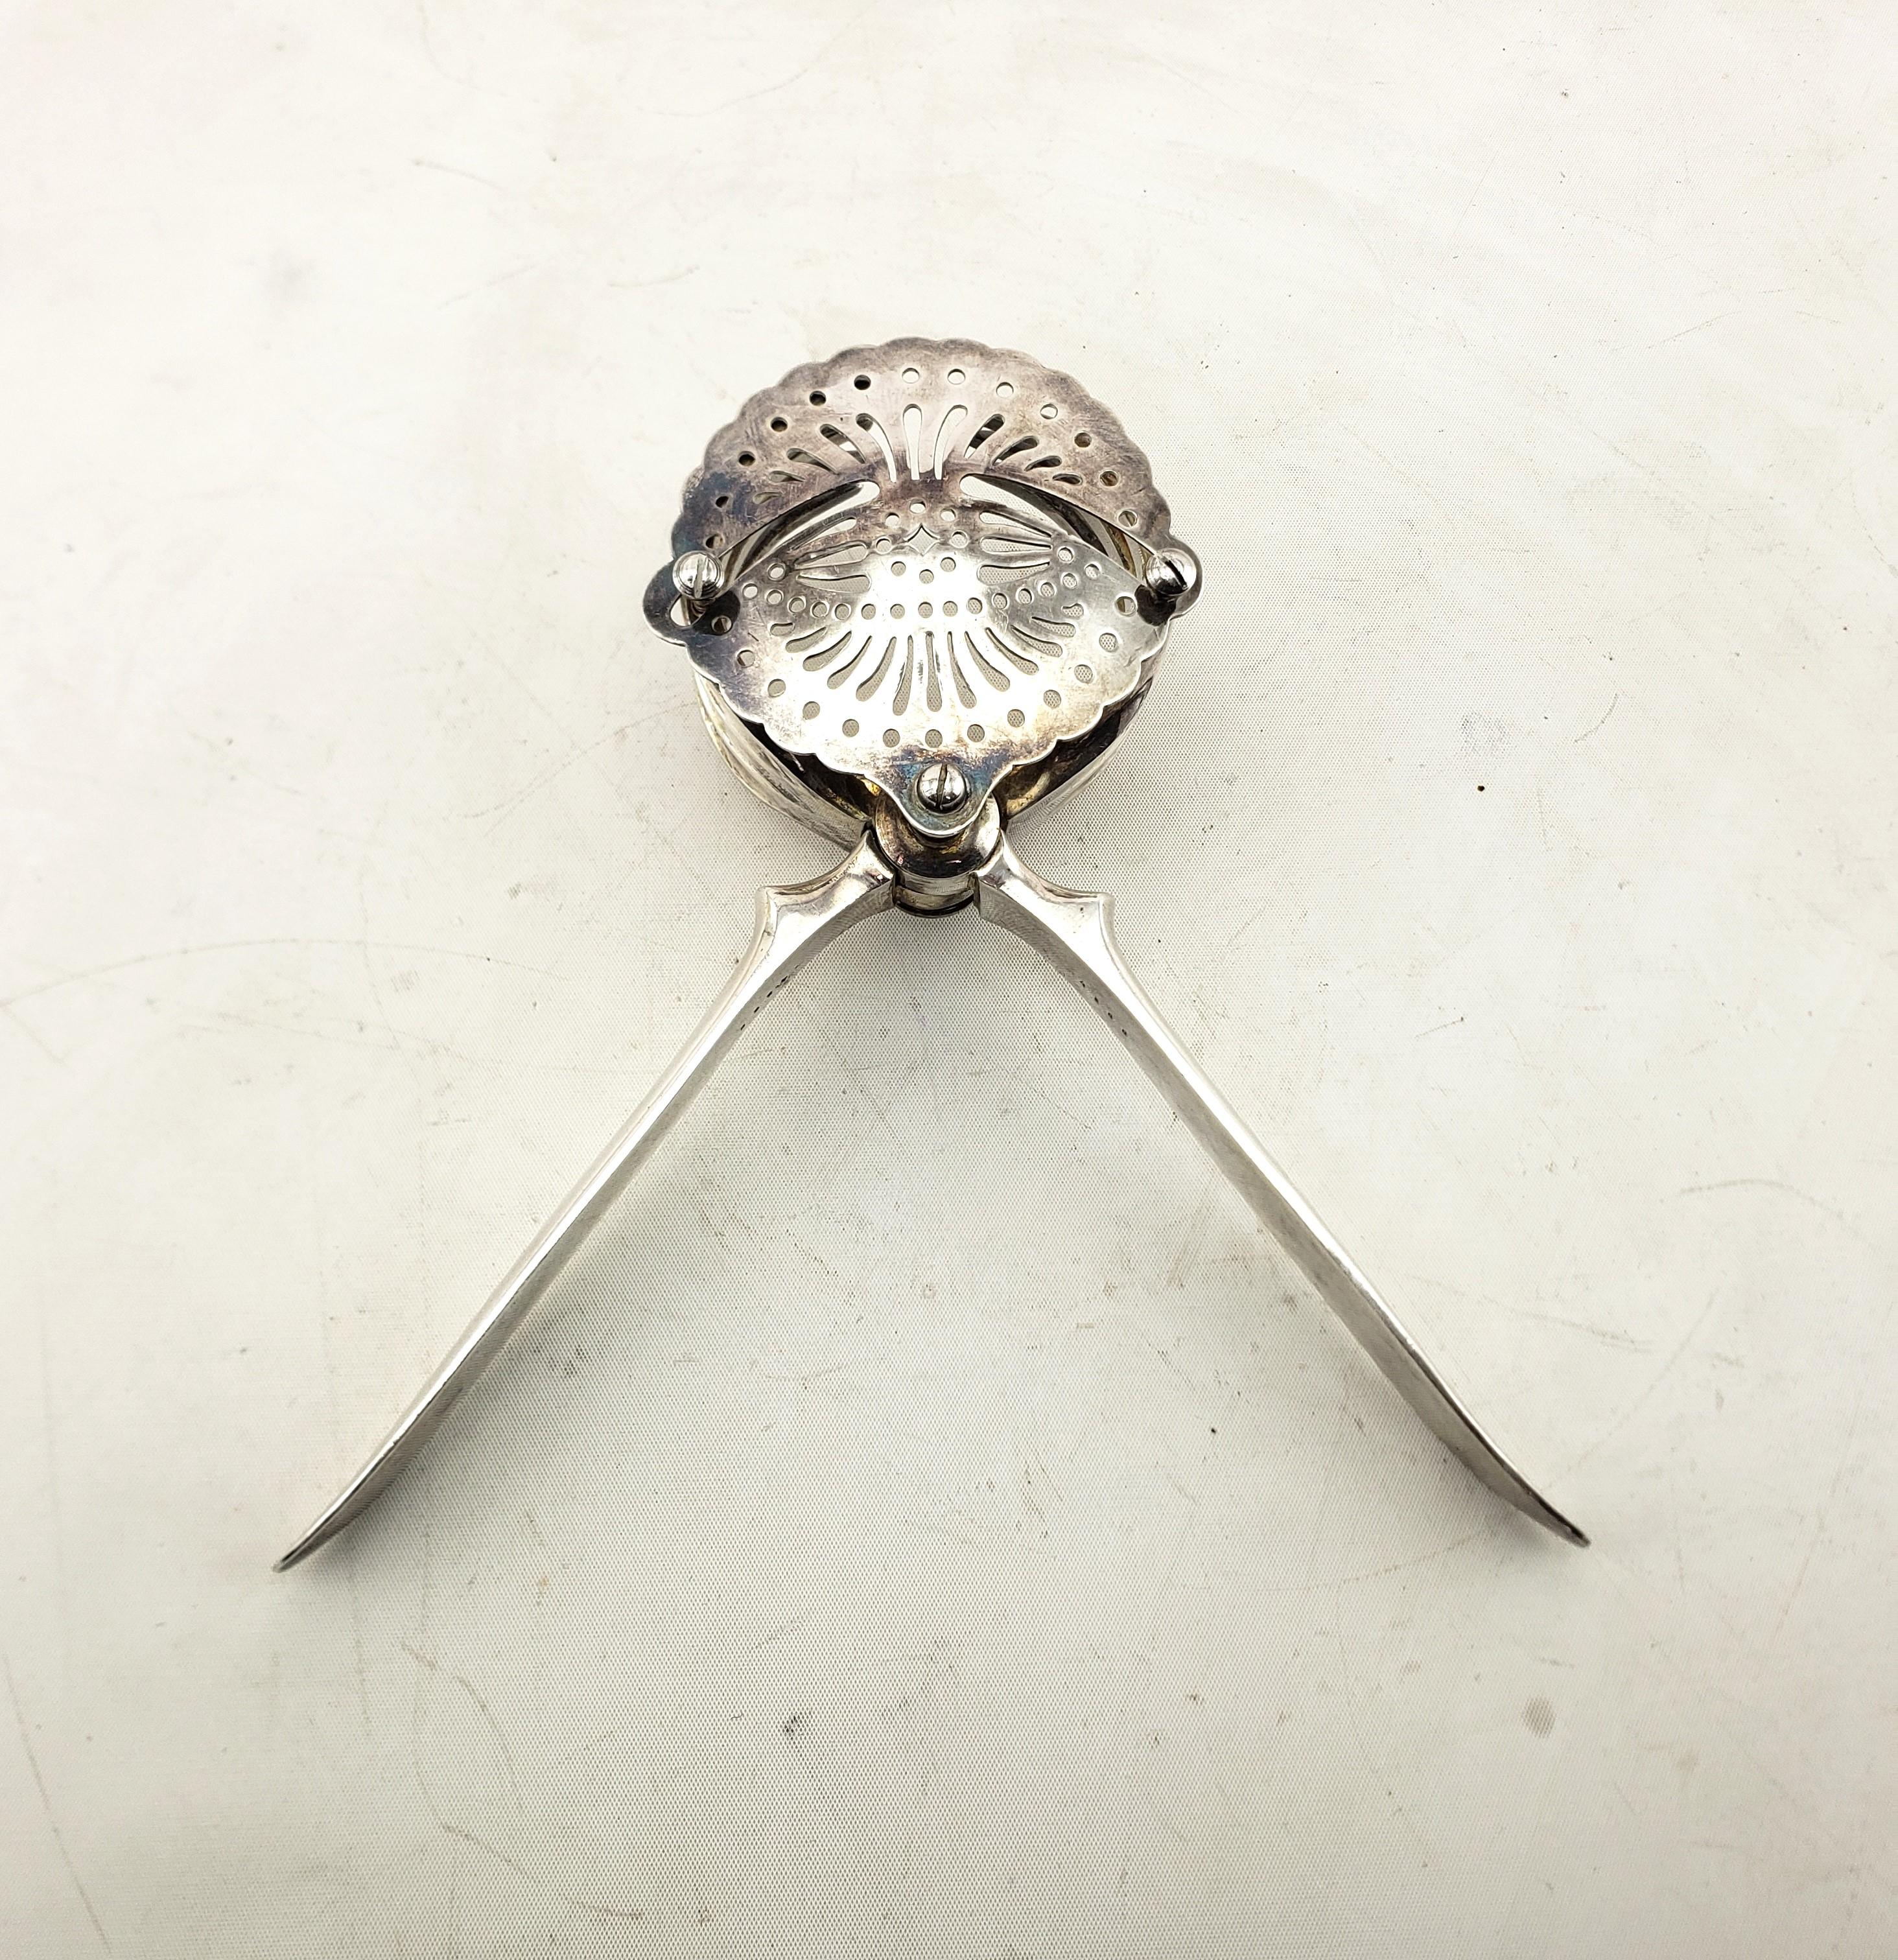 Christofle Antique Silver Plated Citrus Hand Press or Lemon Squeezer In Good Condition For Sale In Hamilton, Ontario